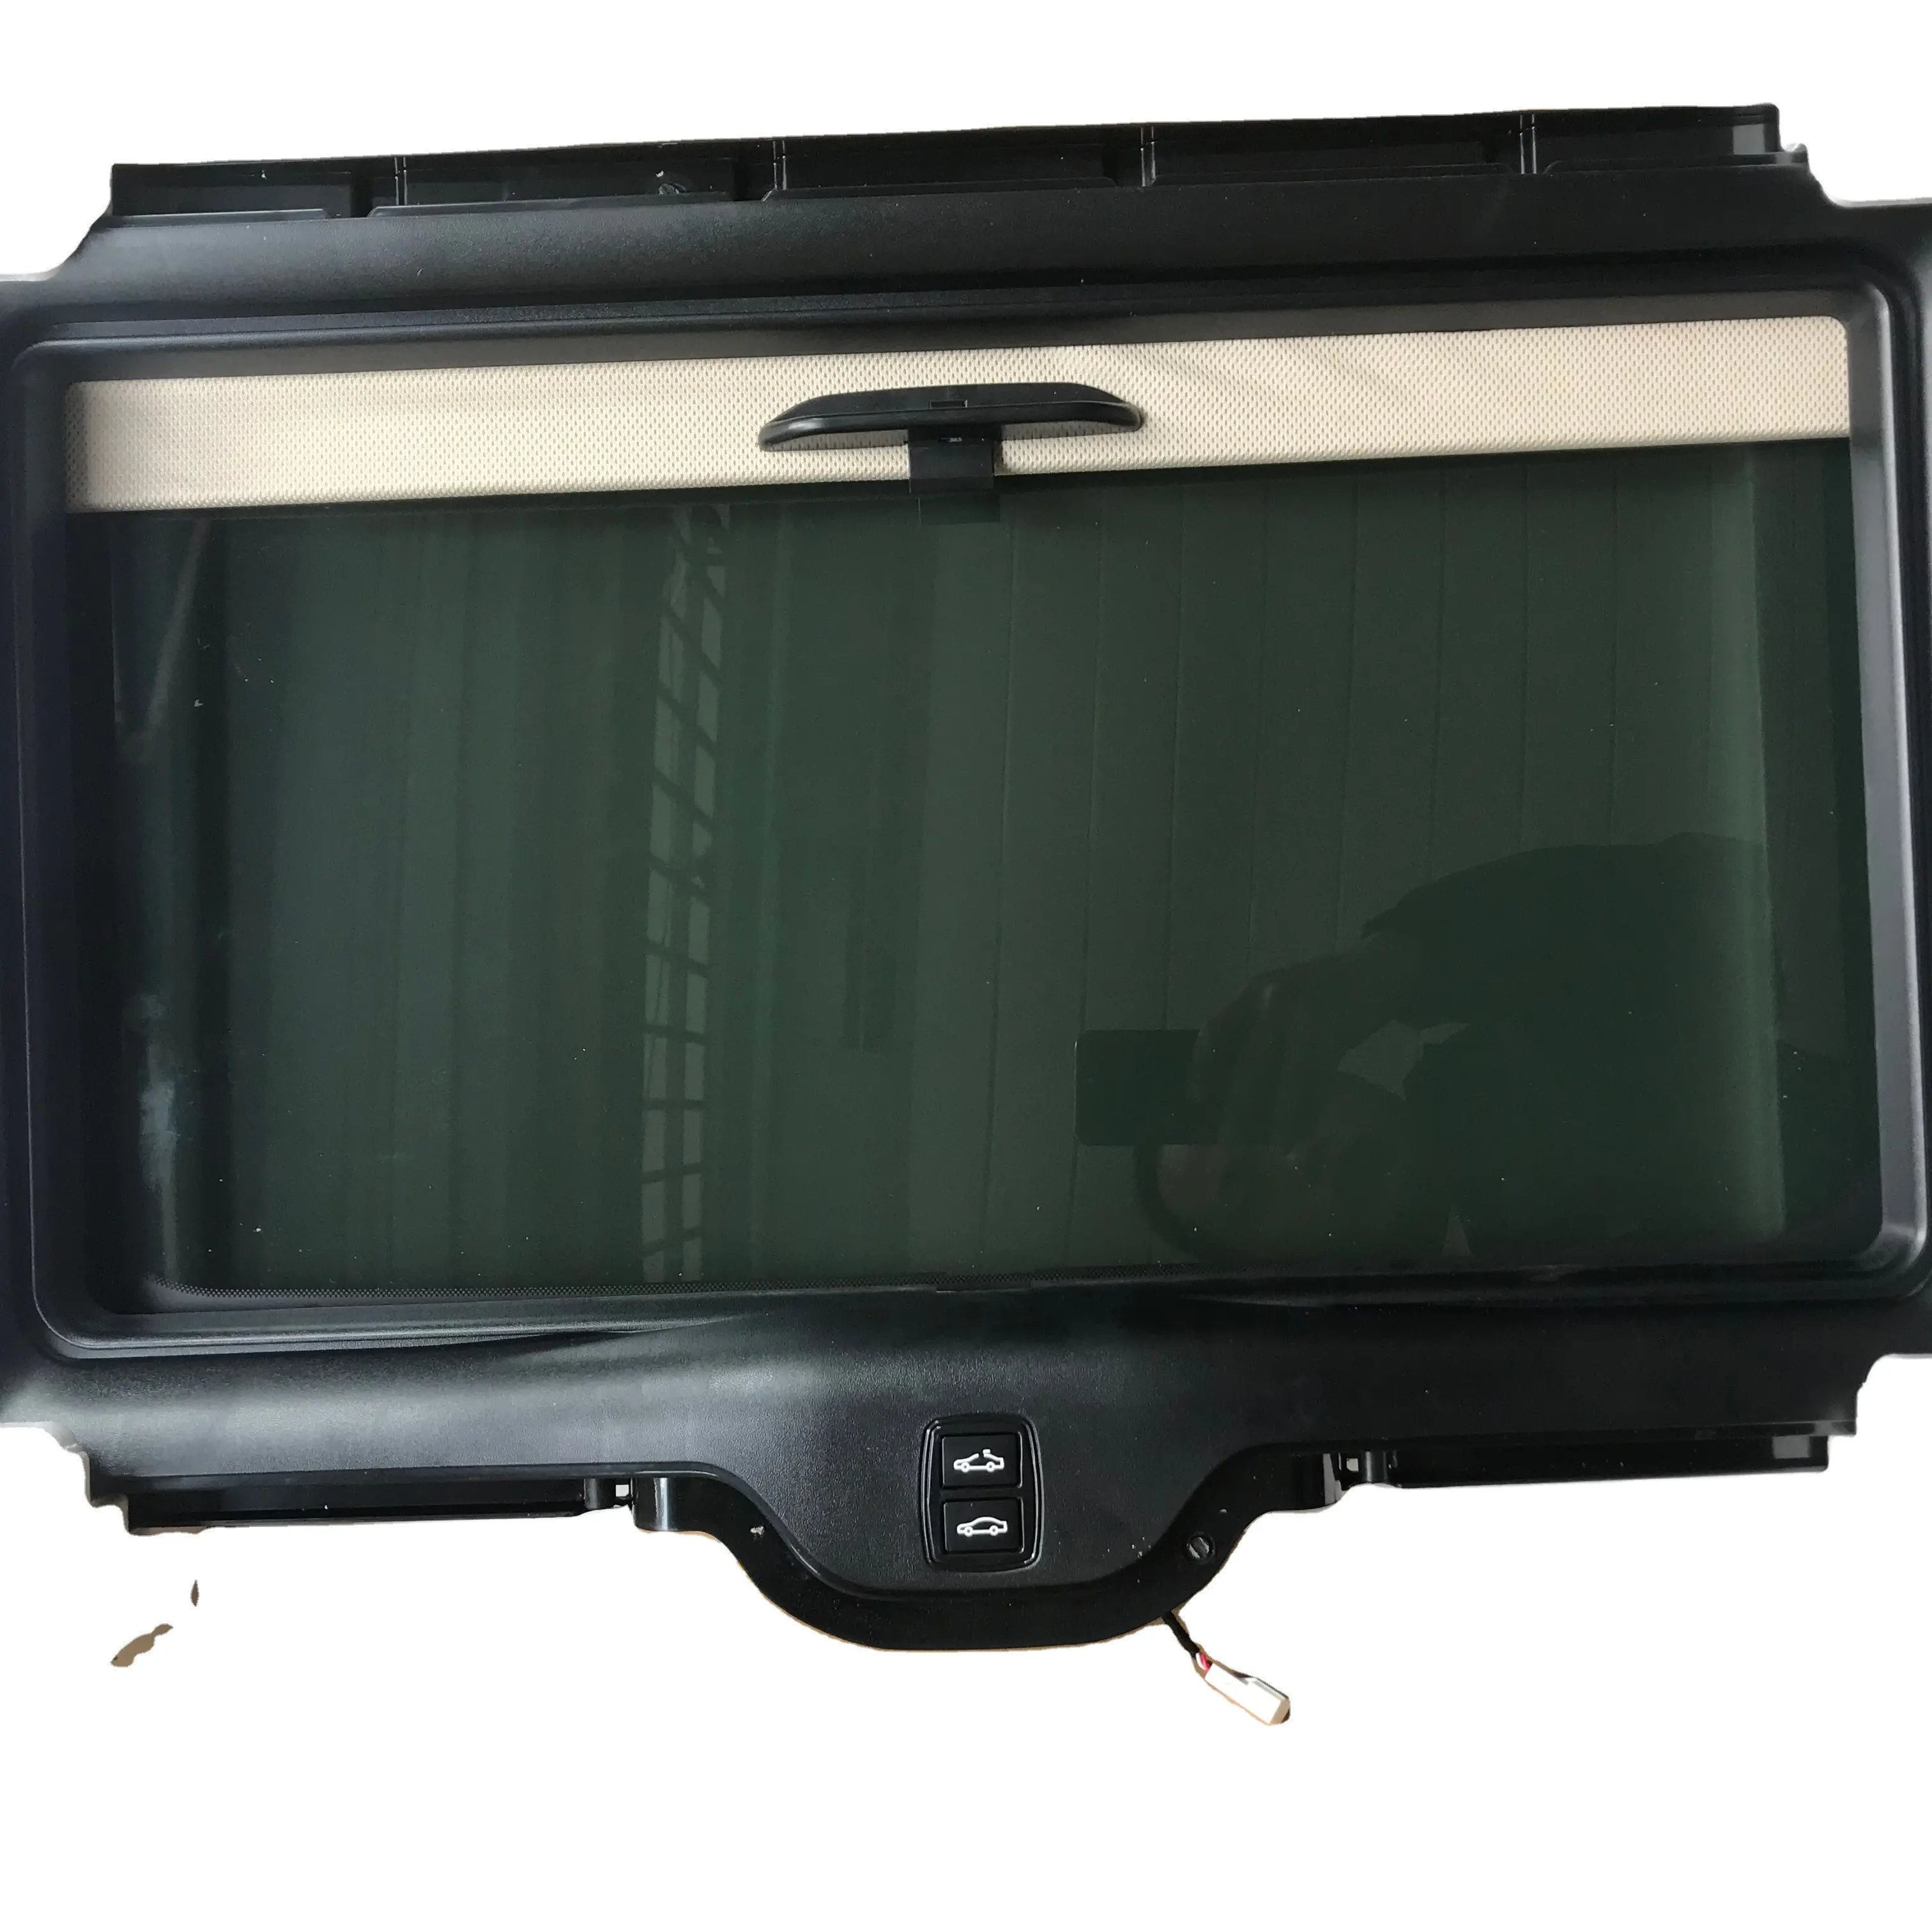 Hot Sell Car Sunroof Aftermarket Electric Sliding Sunroof Universal Car Sunroof Part